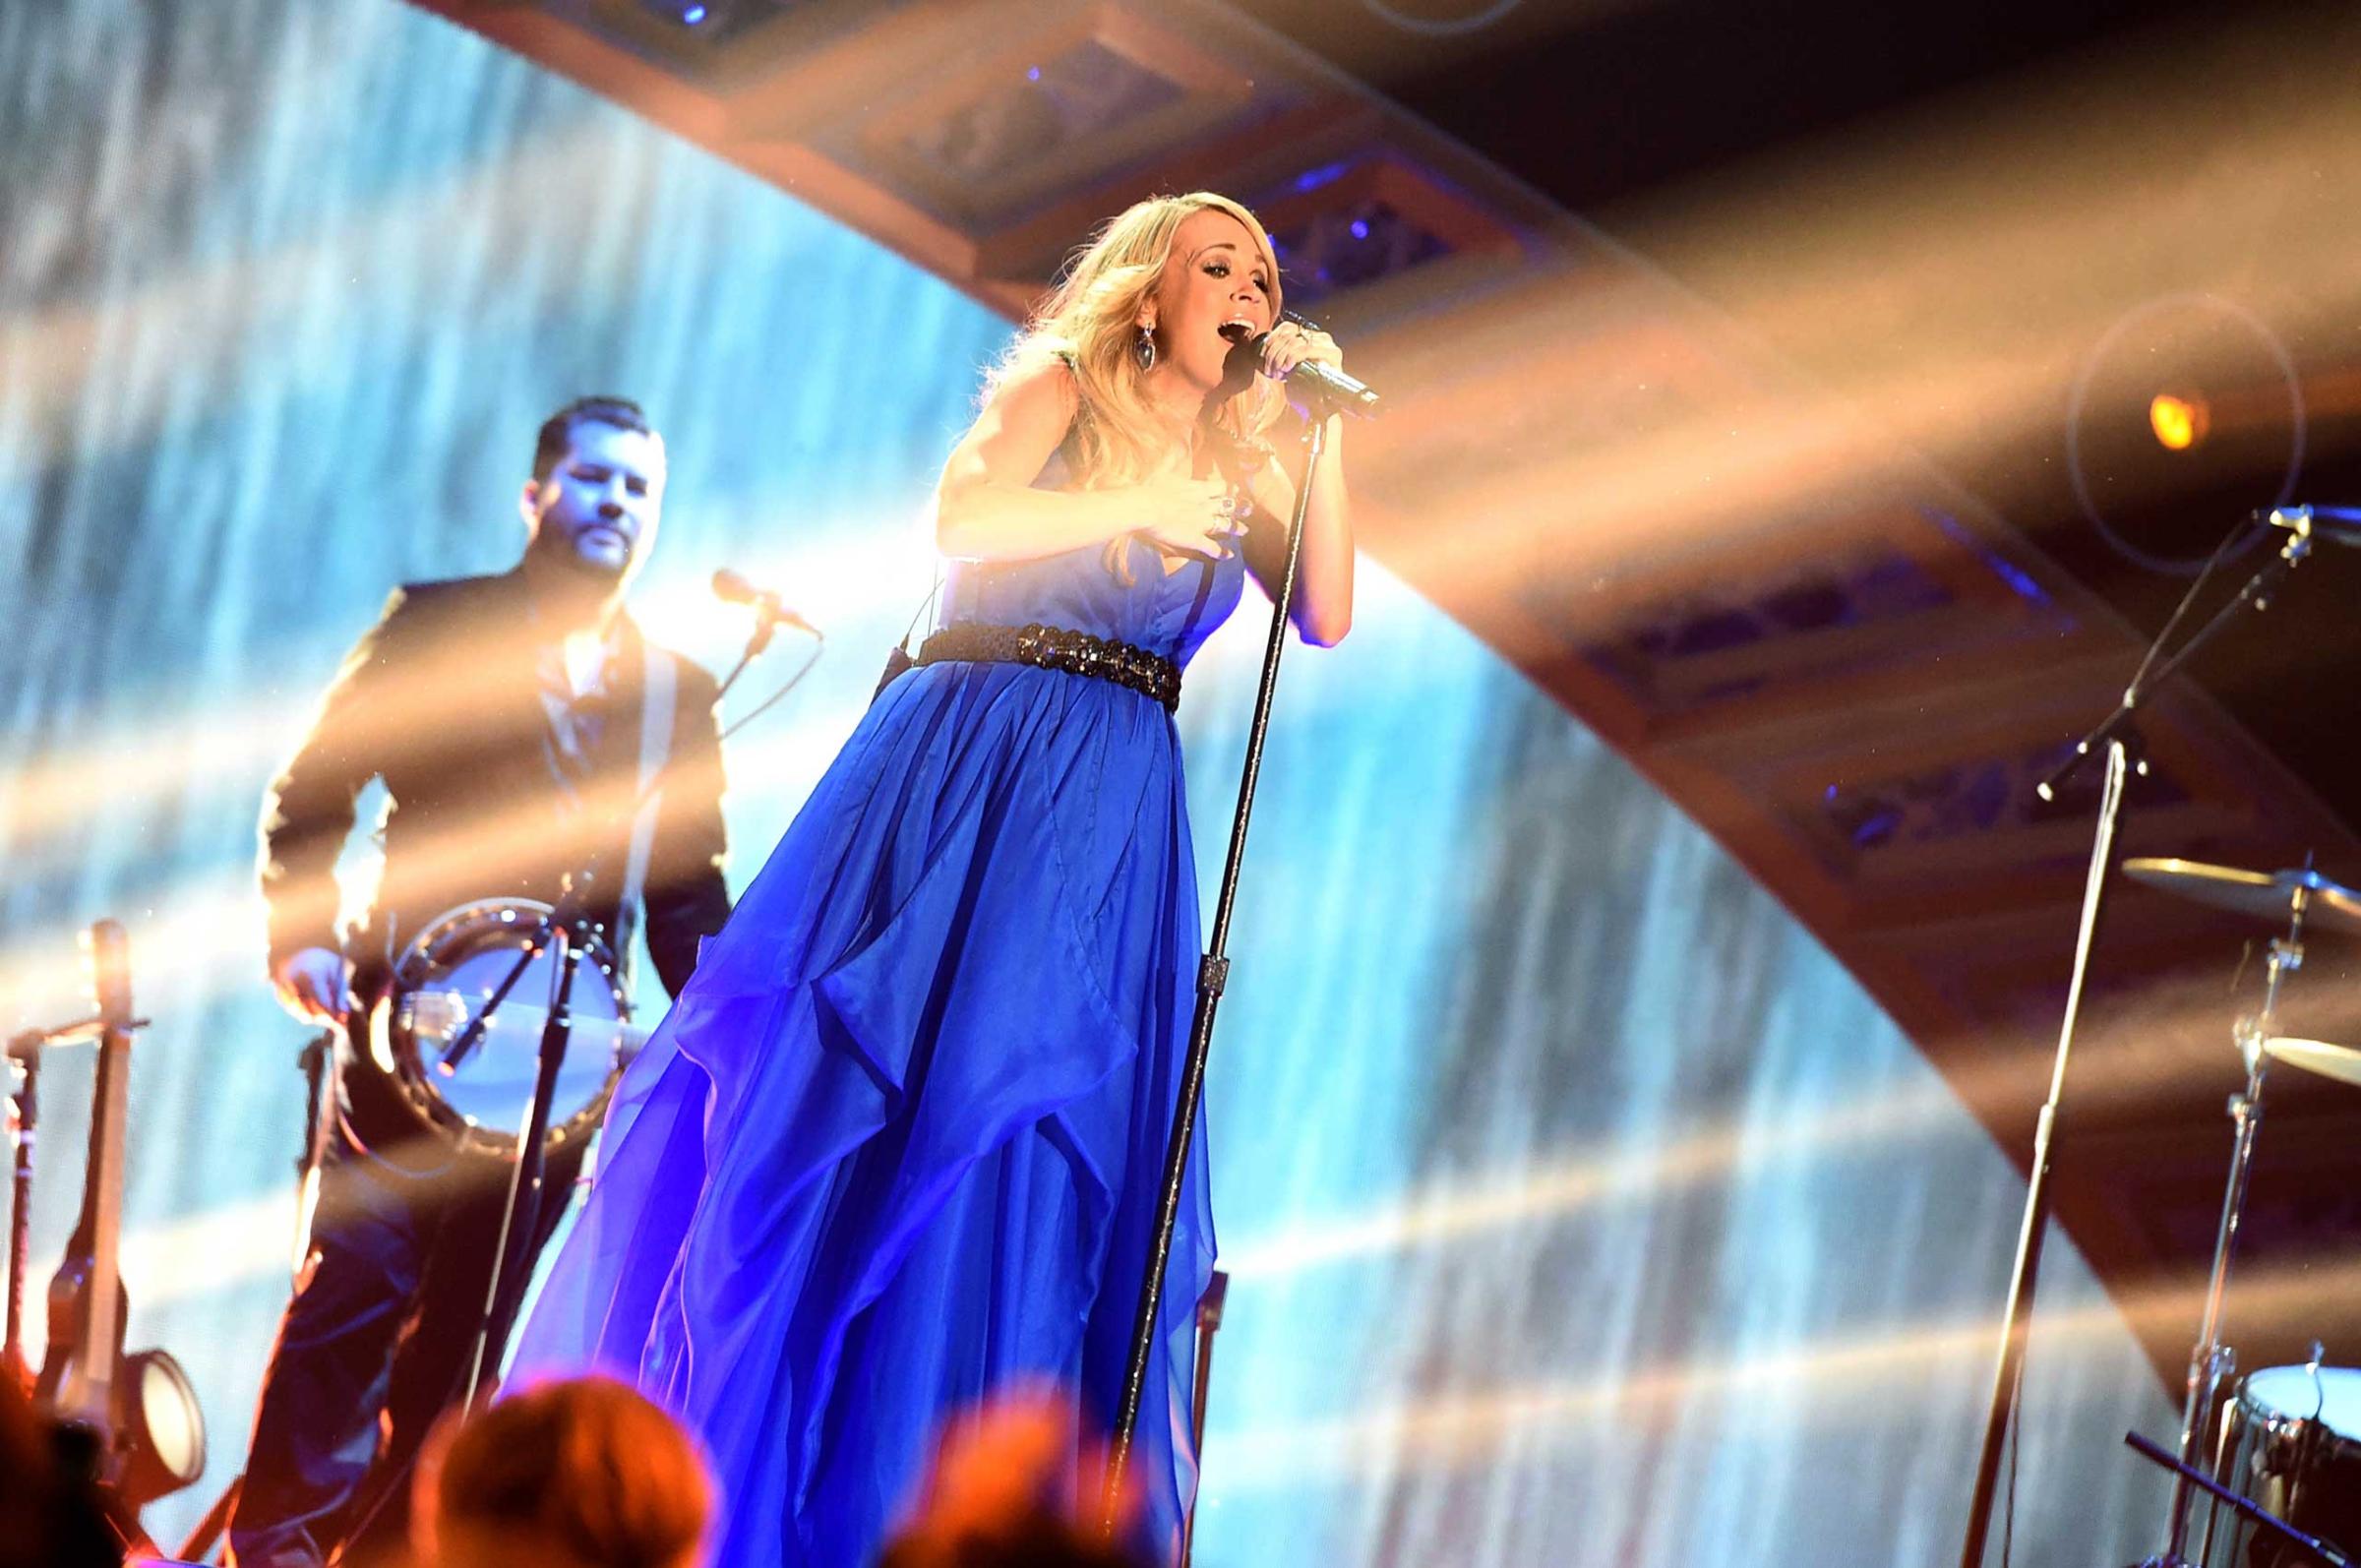 Carrie Underwood performs at the 2014 American Country Countdown Awards at Music City Center in Nashville on Dec. 15, 2014.